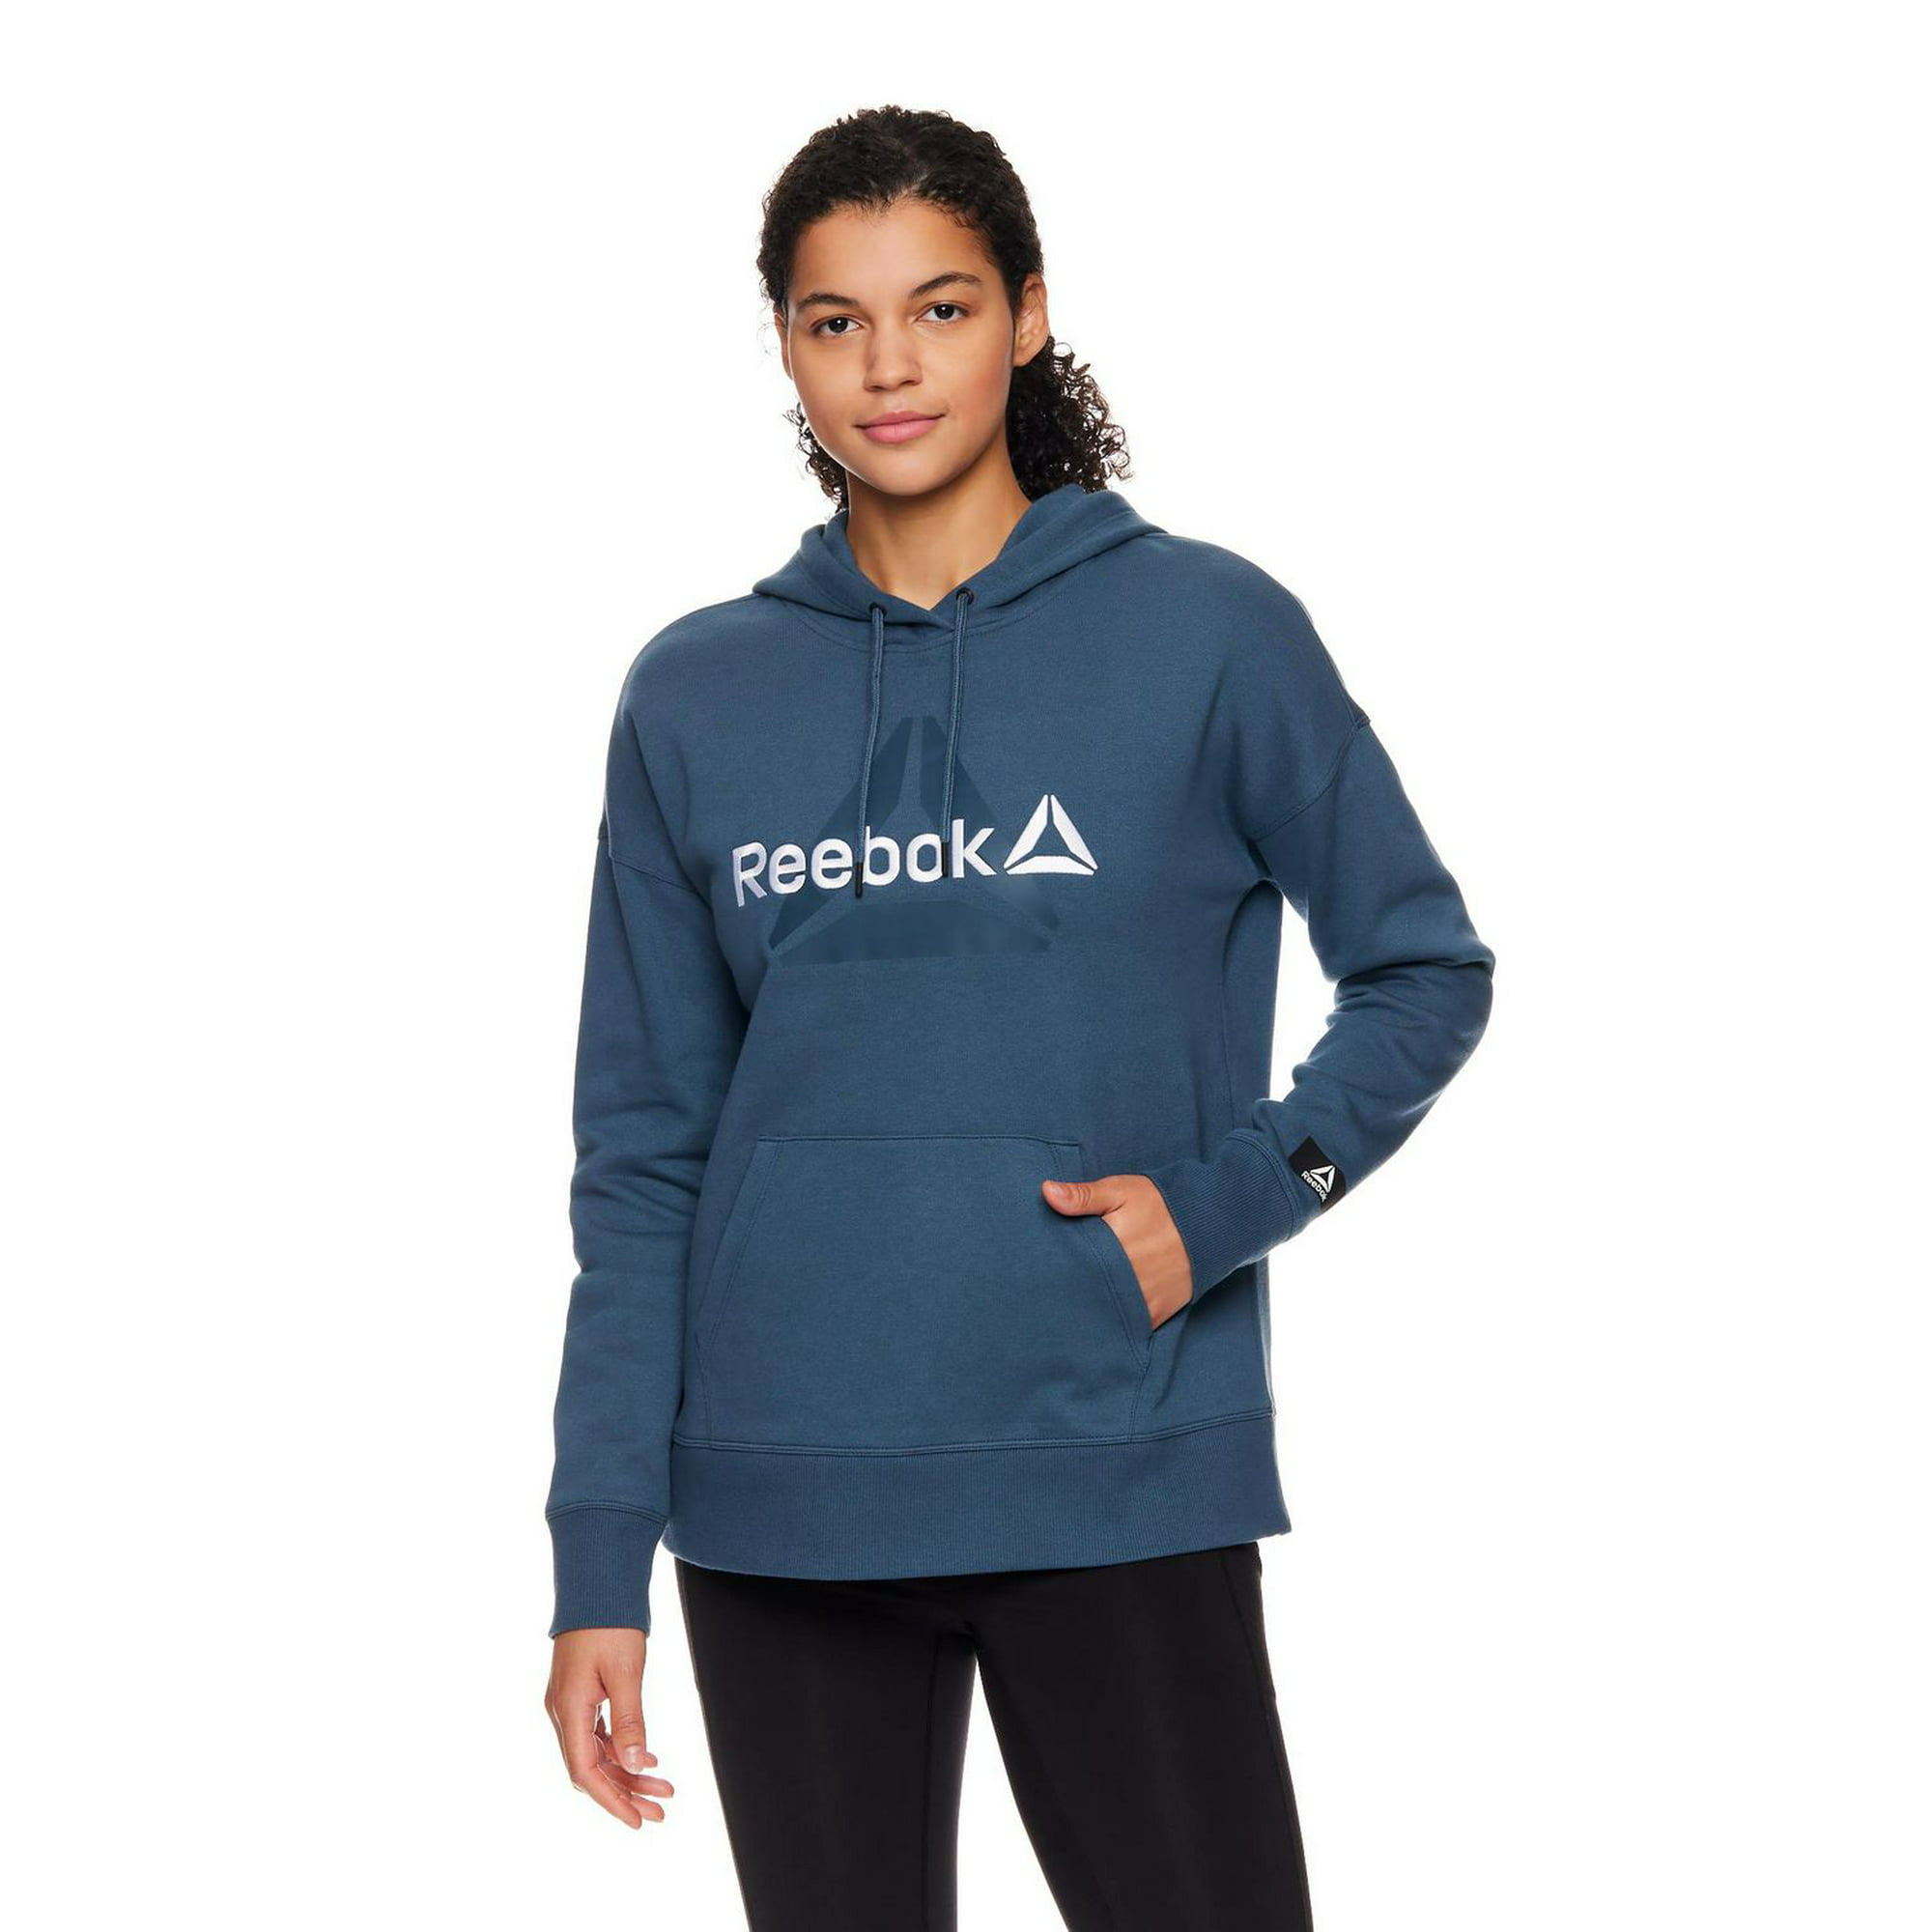 Walmart Canada - New to store men's and women's Reebok clothing